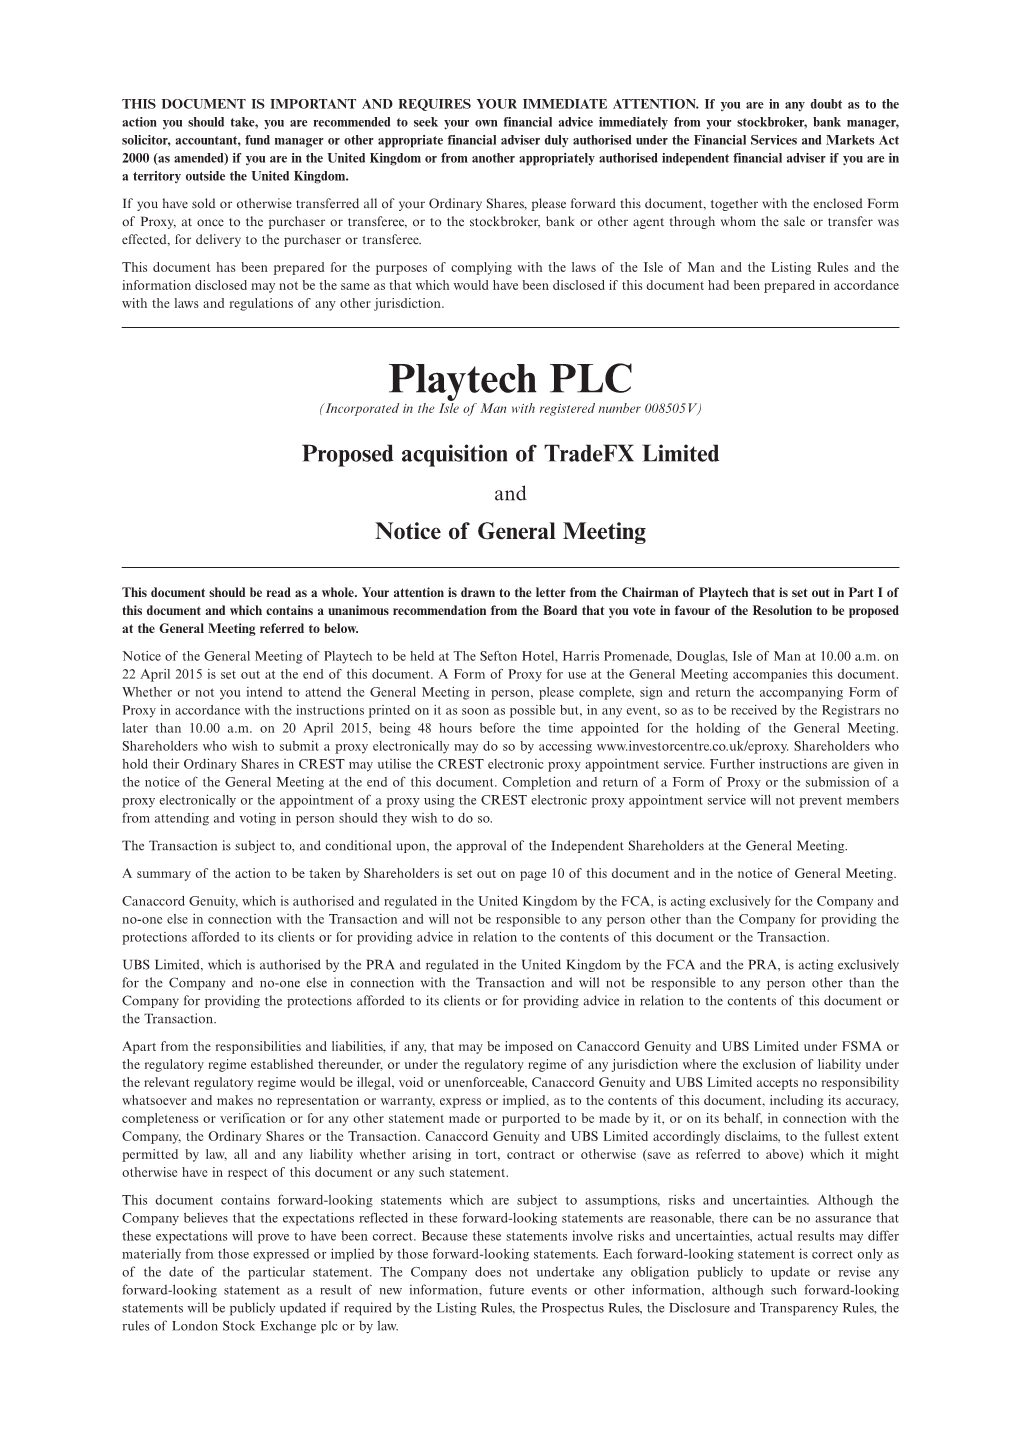 Playtech PLC (Incorporated in the Isle of Man with Registered Number 008505V)